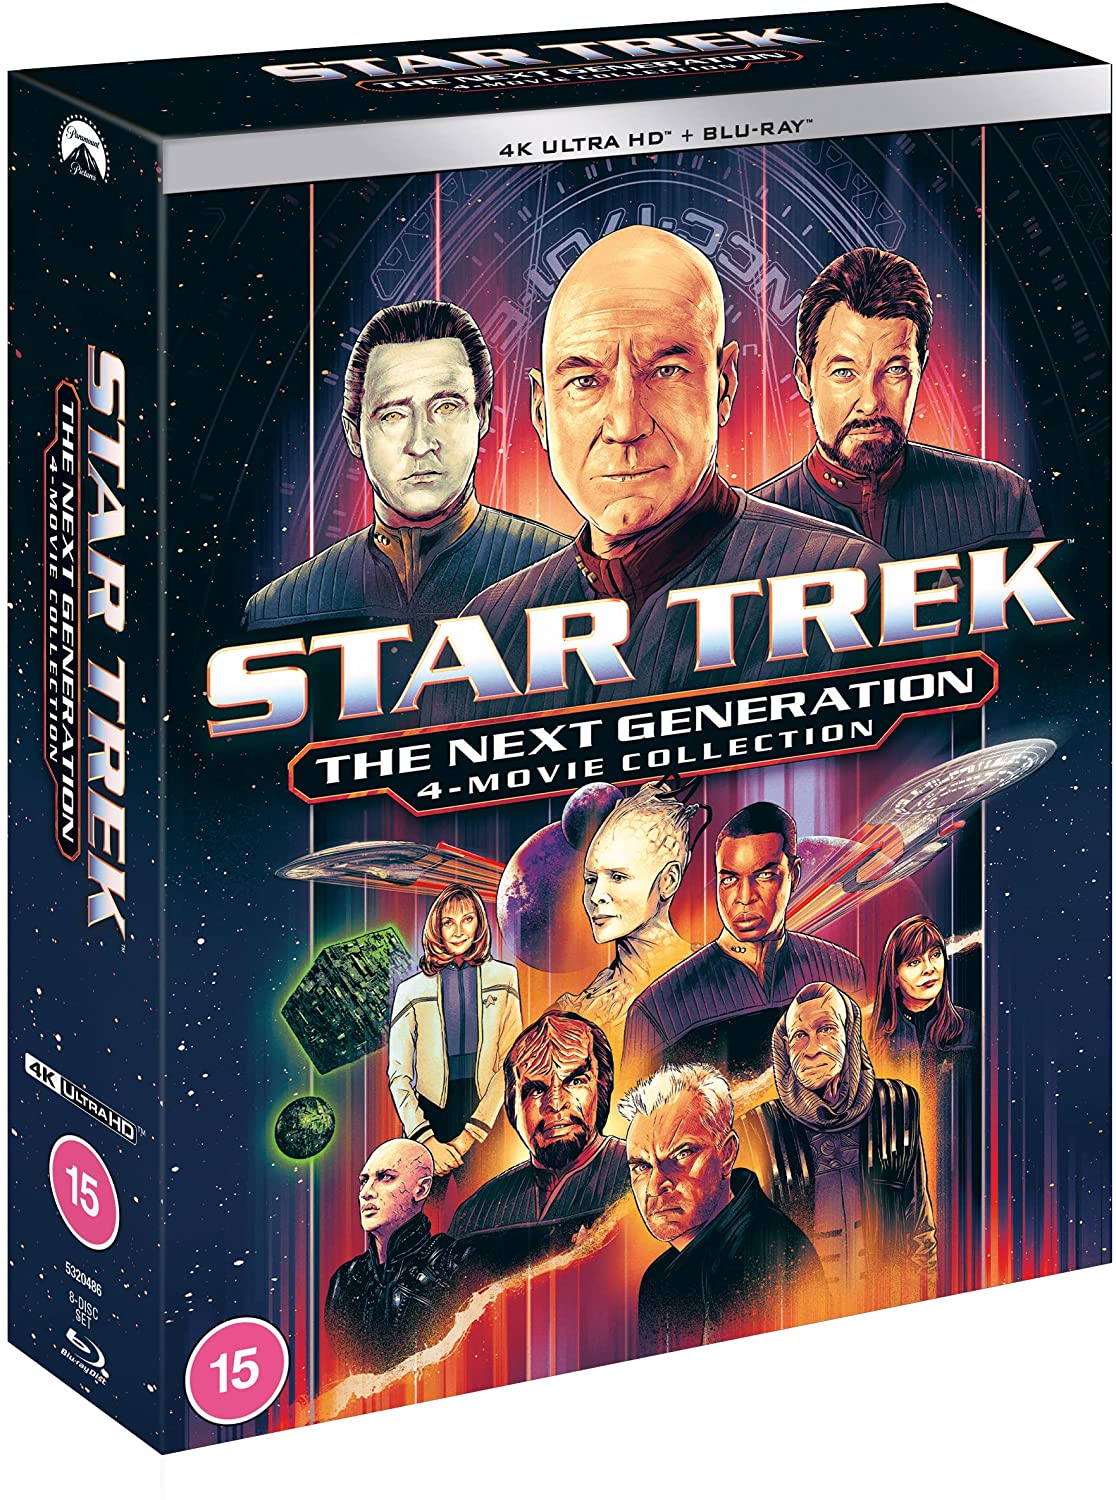 Star Trek: The Next Generation 4 Movie Collection 4K UHD Review